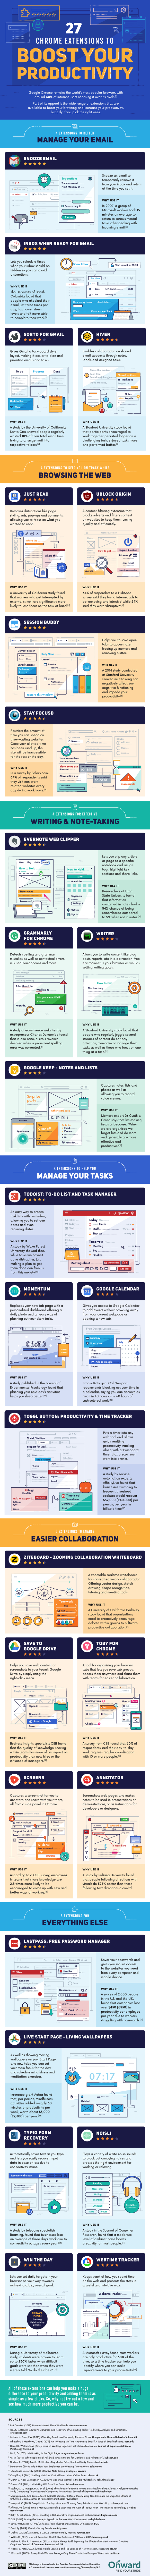 27 Chrome Extensions to Boost Your Productivity Infographic